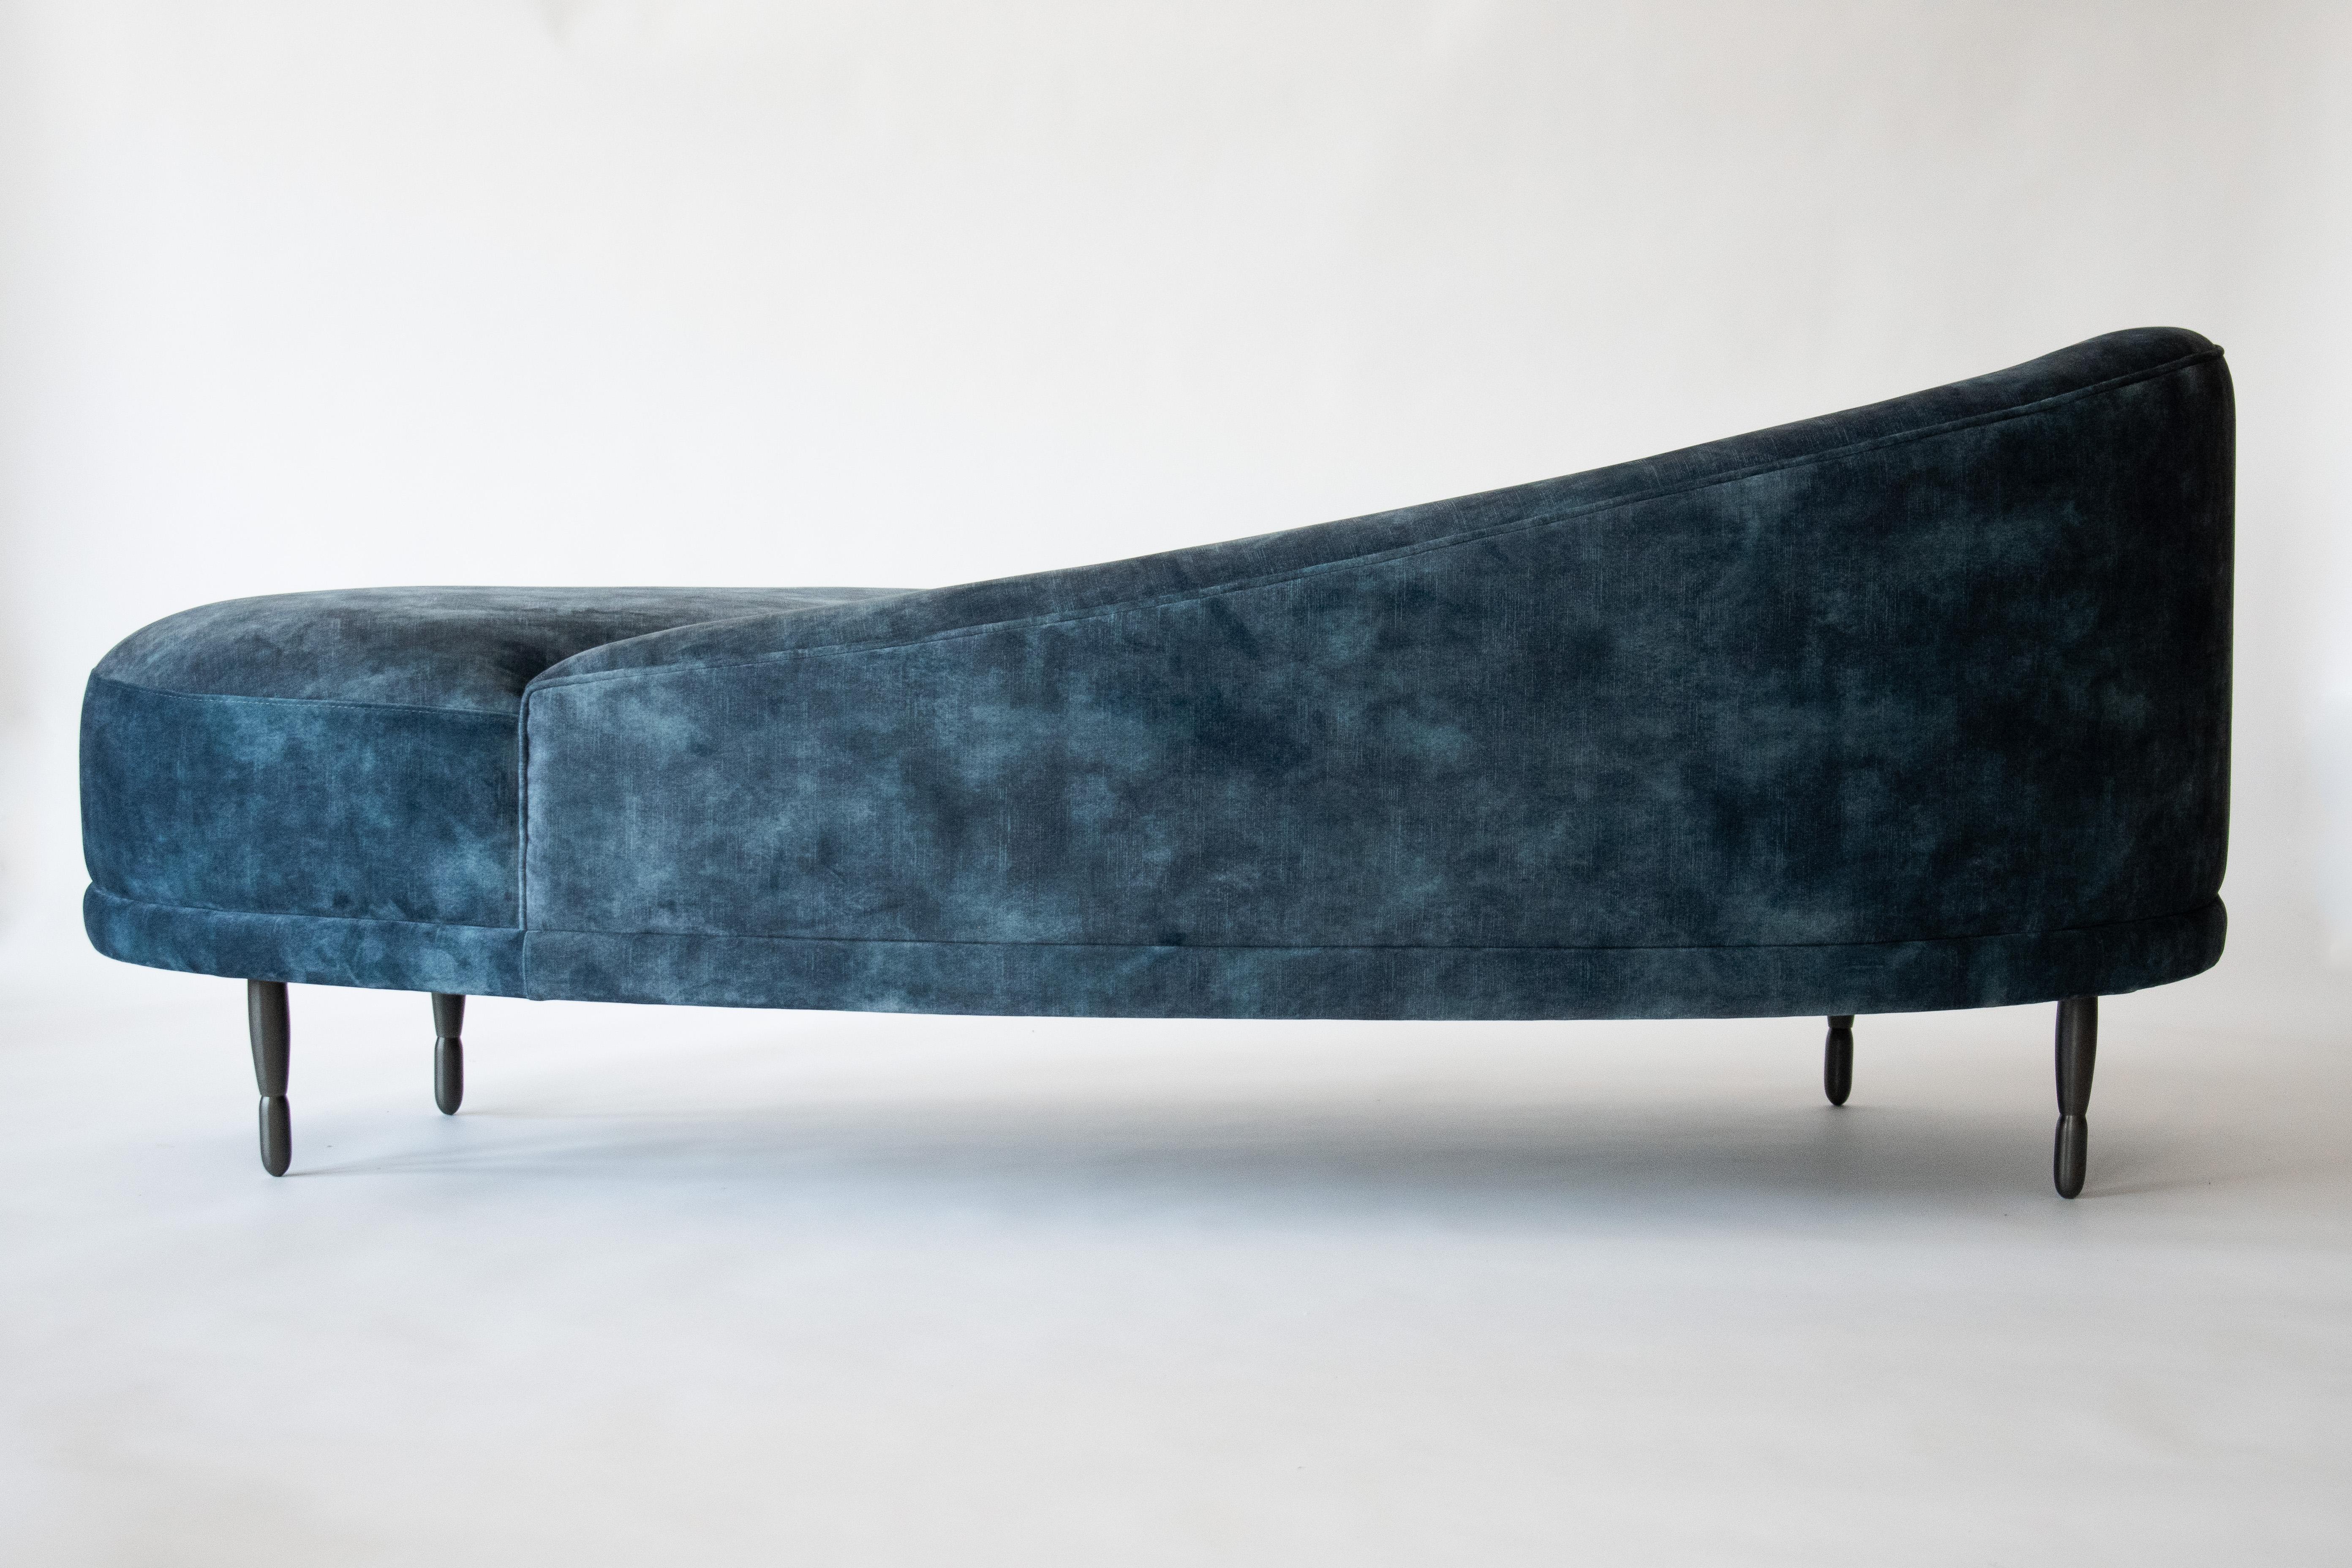 SAMPLE SALE
Fabric - Lovely Atlantic. 

This is a showroom floor model being sold as-is (not made to order). For made-to-order items, please reference the original item listing. 

The Claire Chaise by DeMuro Das has a curved back and seat and